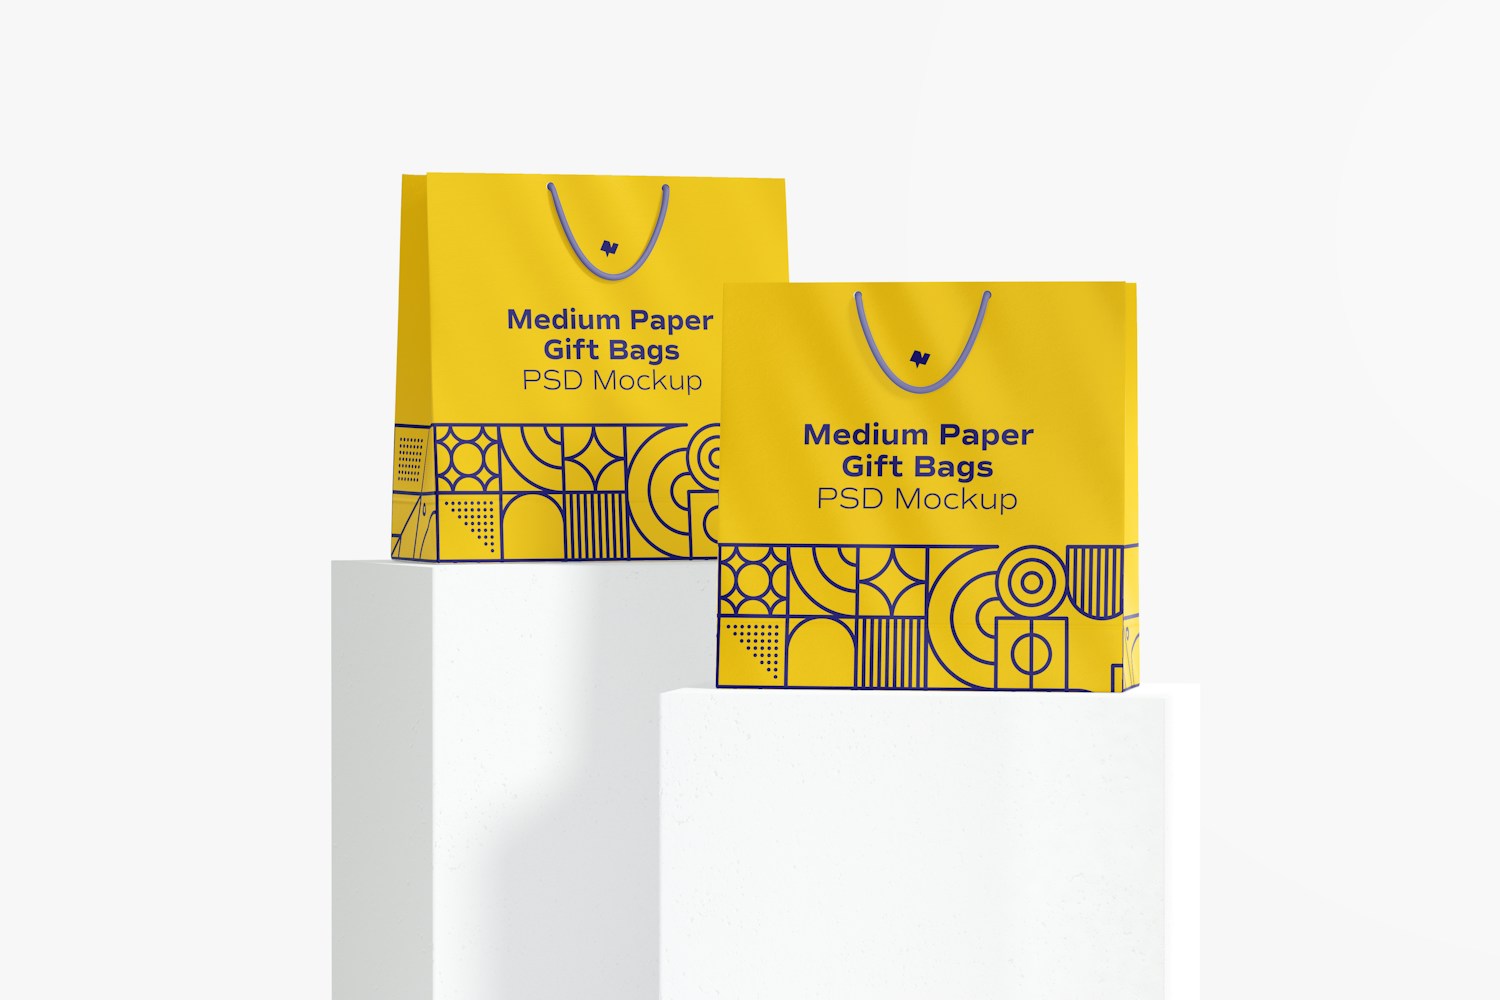 Medium Paper Gift Bags With Rope Handle Set Mockup